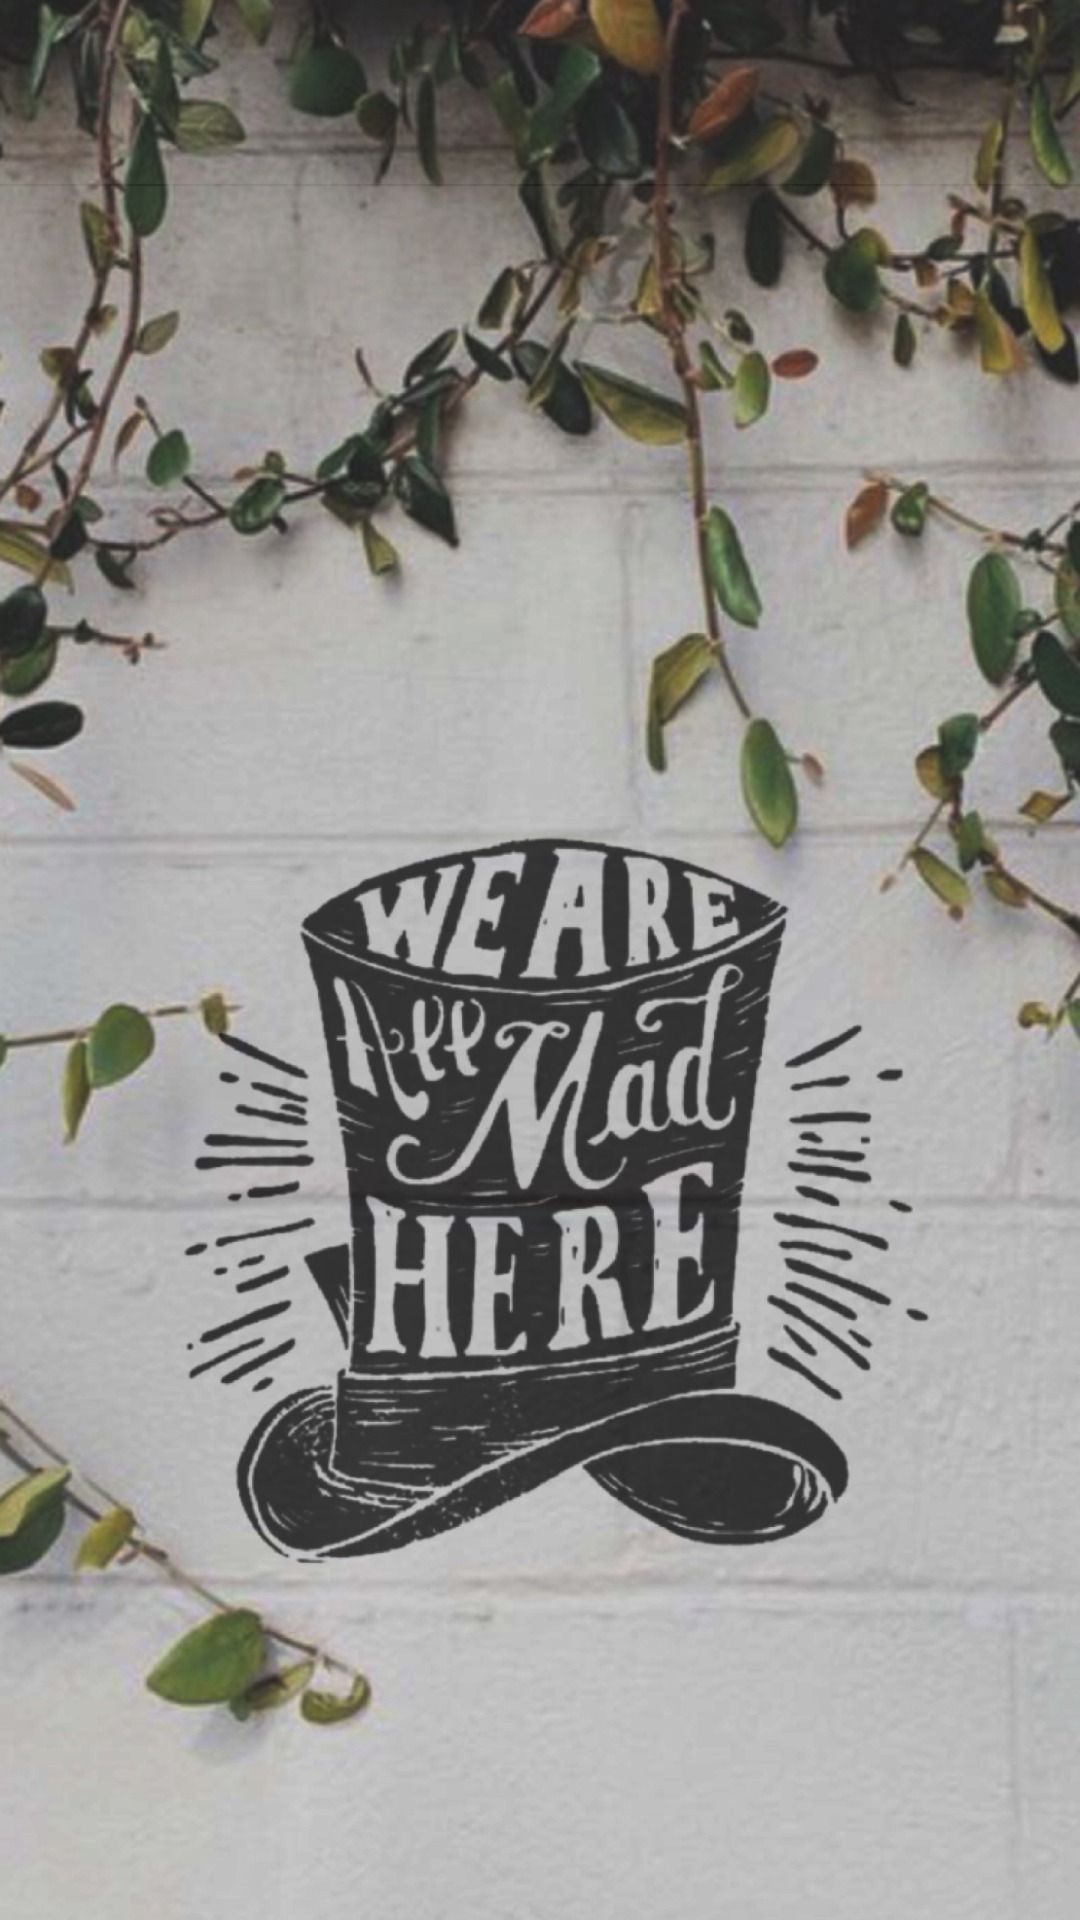 Were all mad here HD wallpapers  Pxfuel